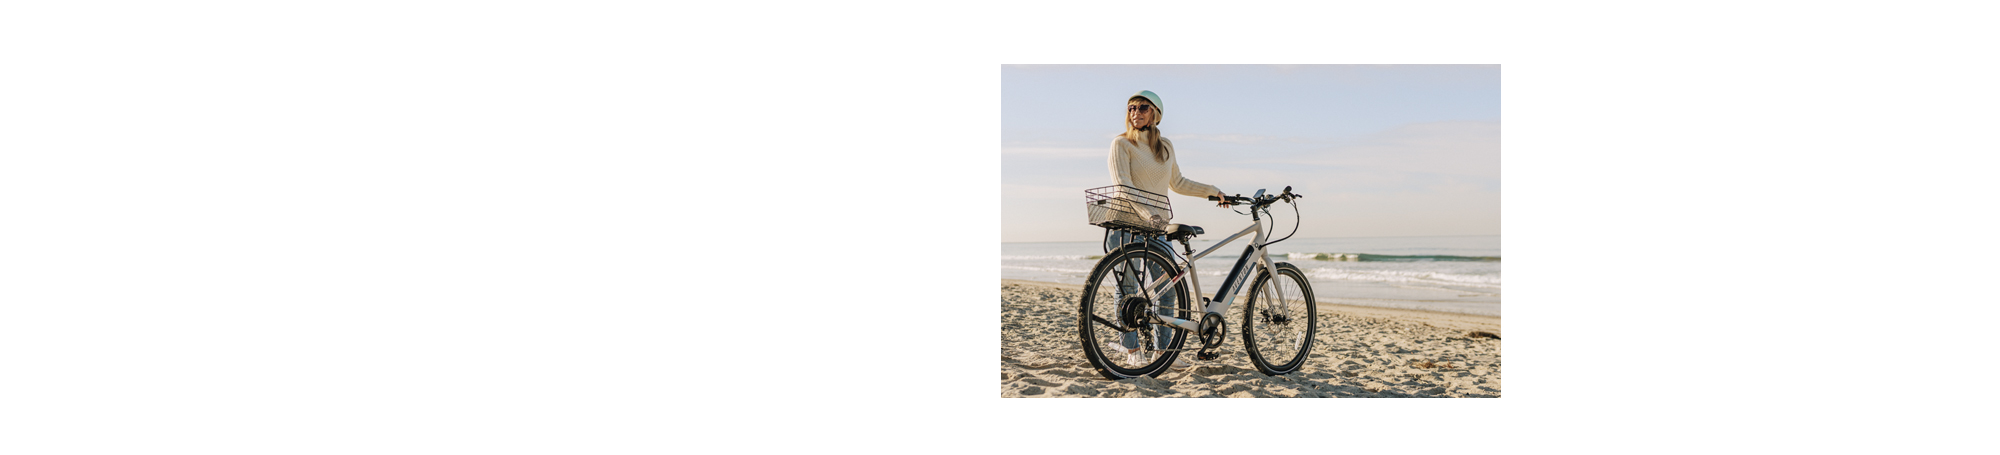 Woman riding an electric bicycle